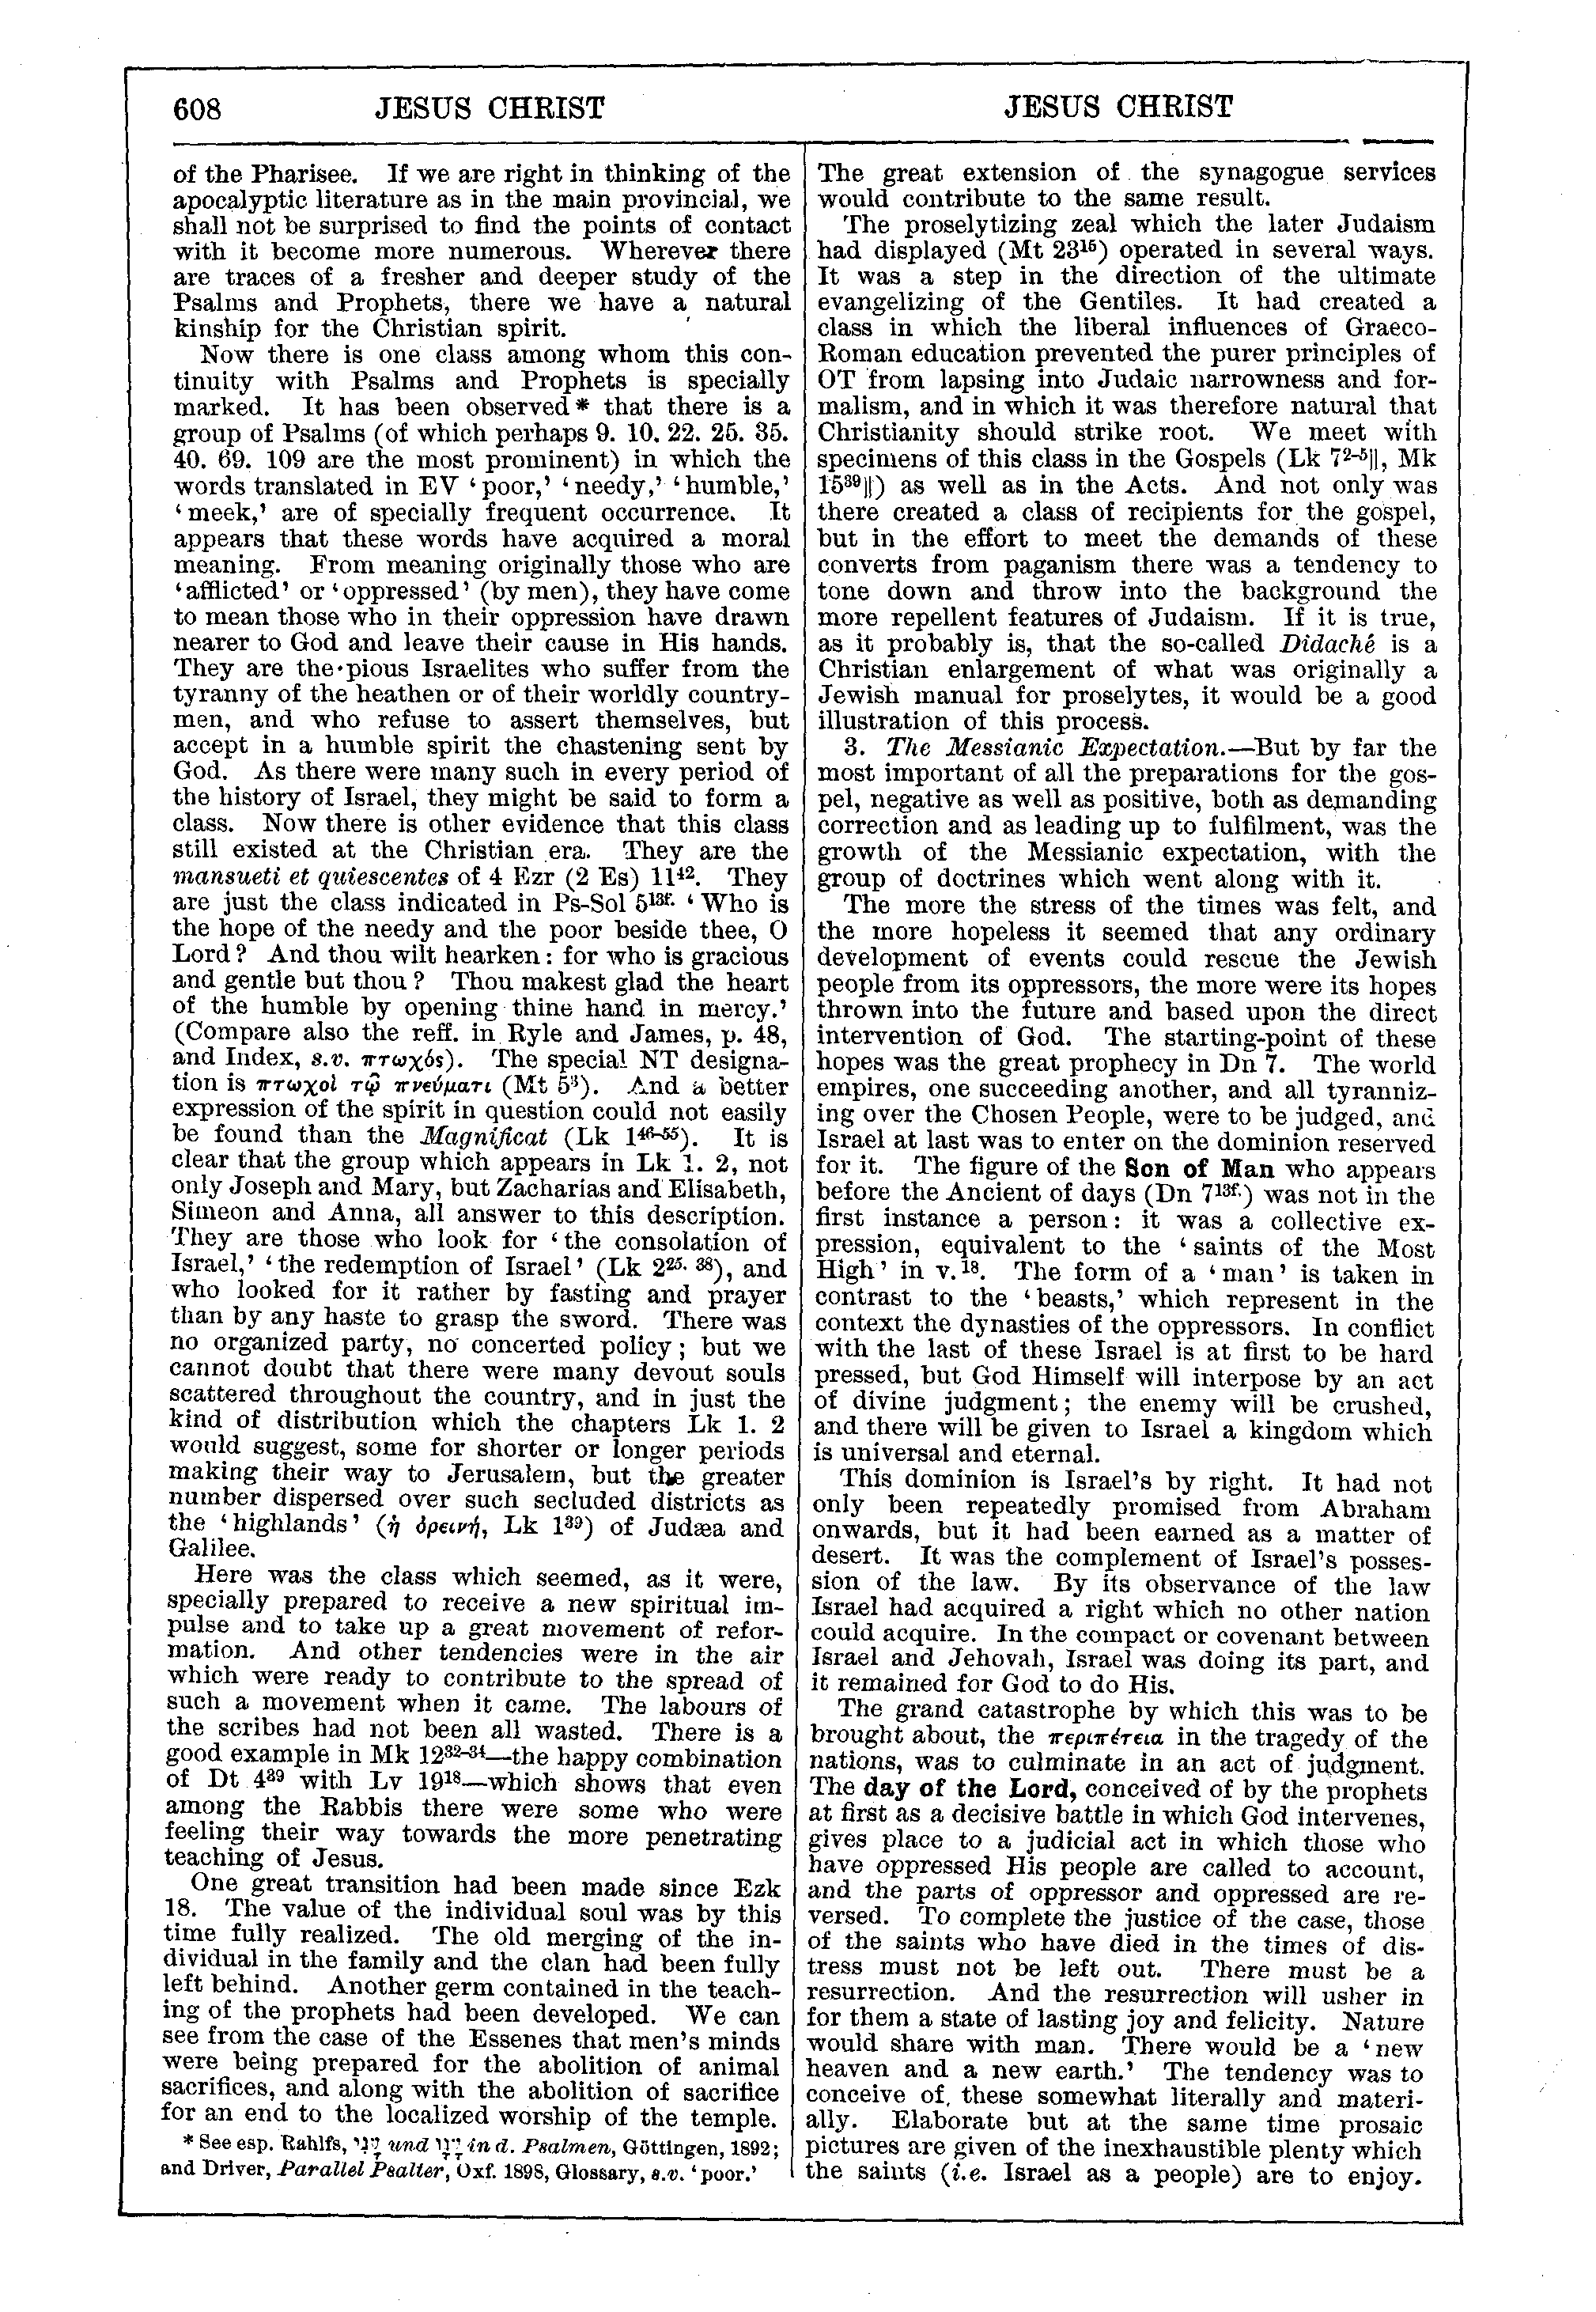 Image of page 608